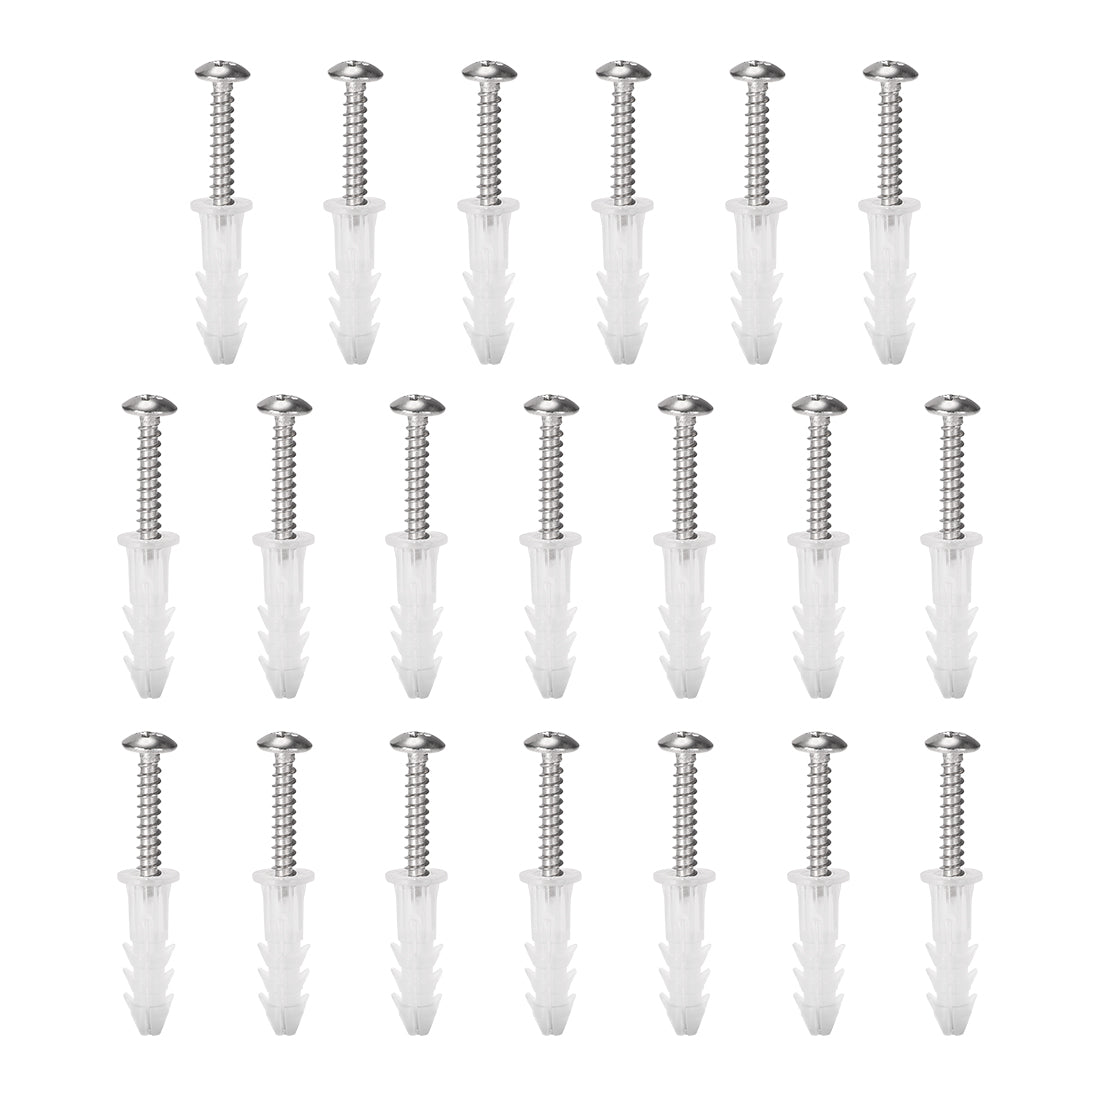 uxcell Uxcell 6 x 26mm Plastic Expansion Tube for Drywall with Screws, Translucent 20pcs